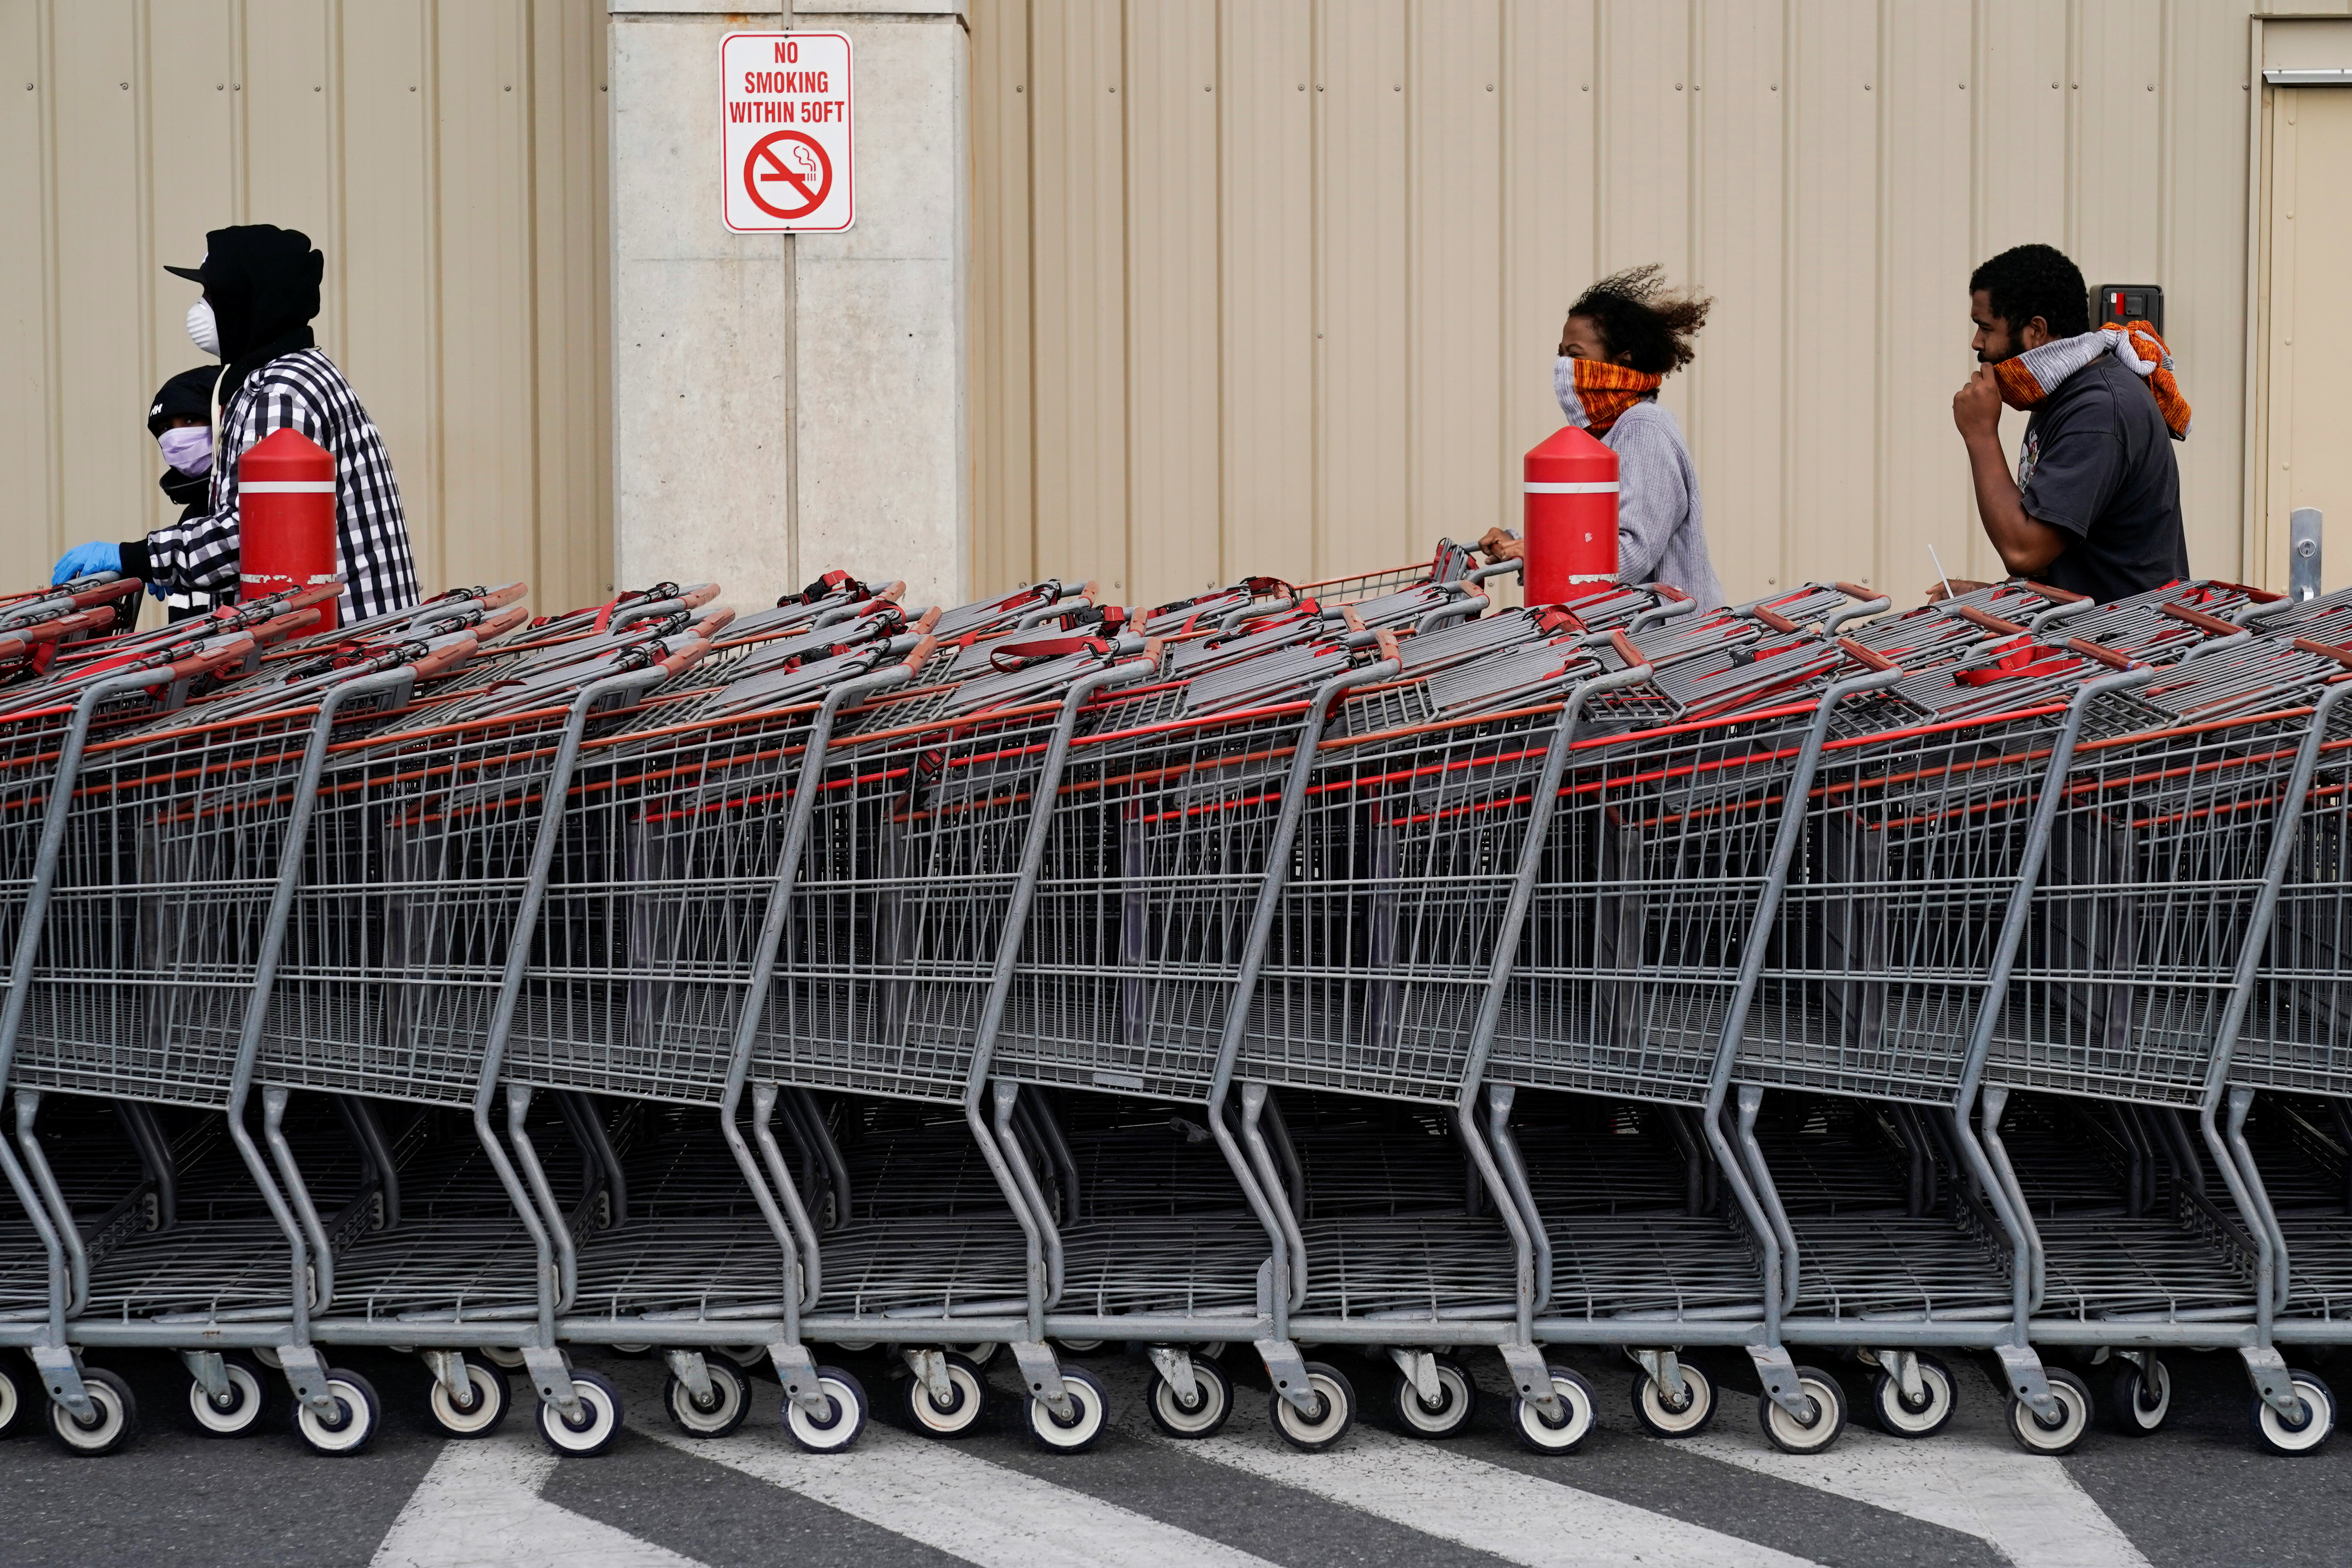 People wear masks as they wait to enter a Costco store during the outbreak of coronavirus in Washington